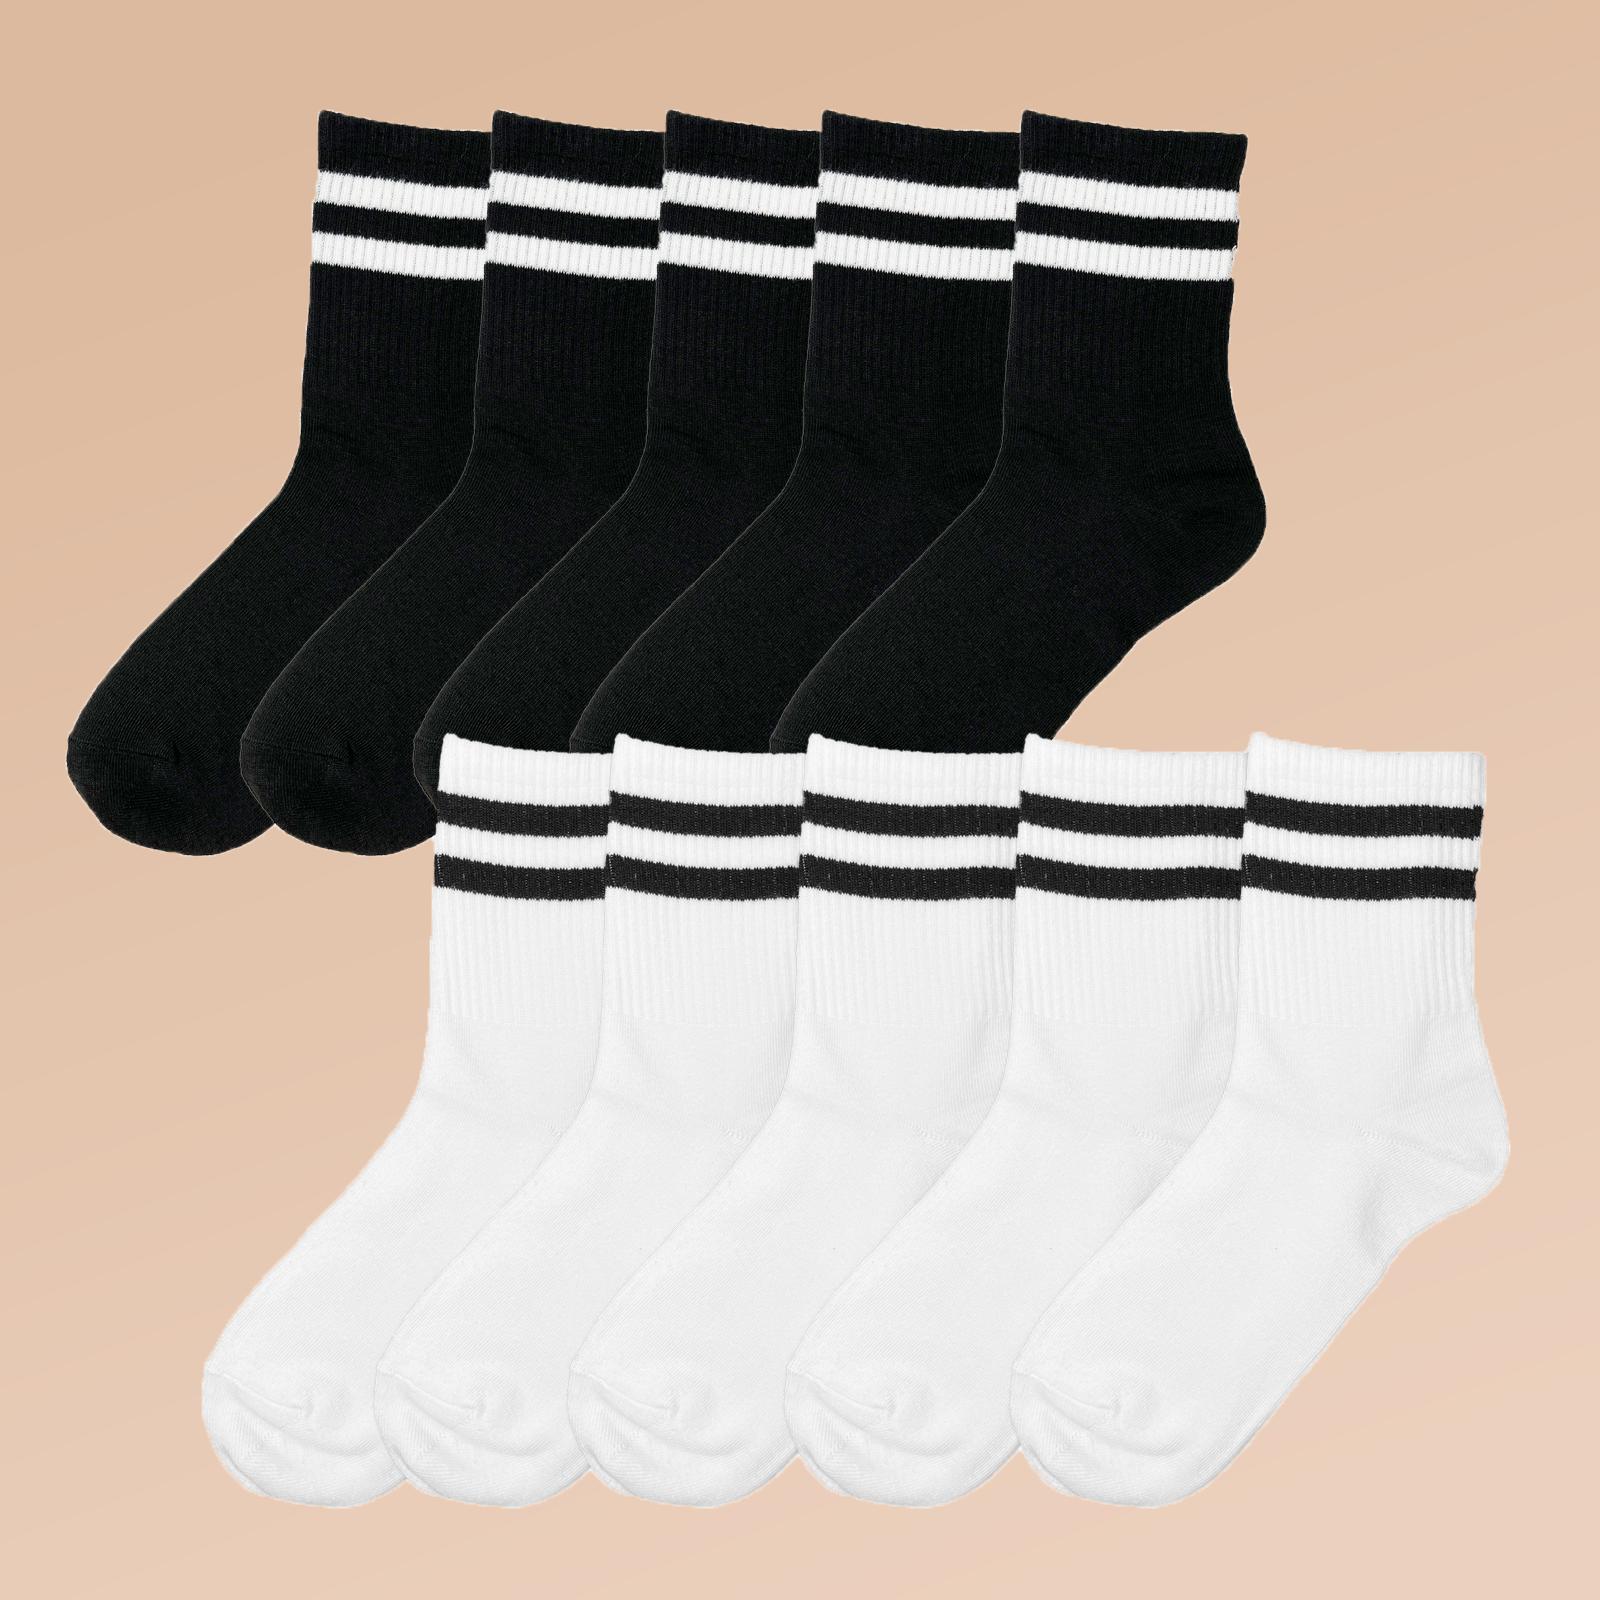 

10 Pairs Women's Black & White Striped Casual Sporty Ankle Socks